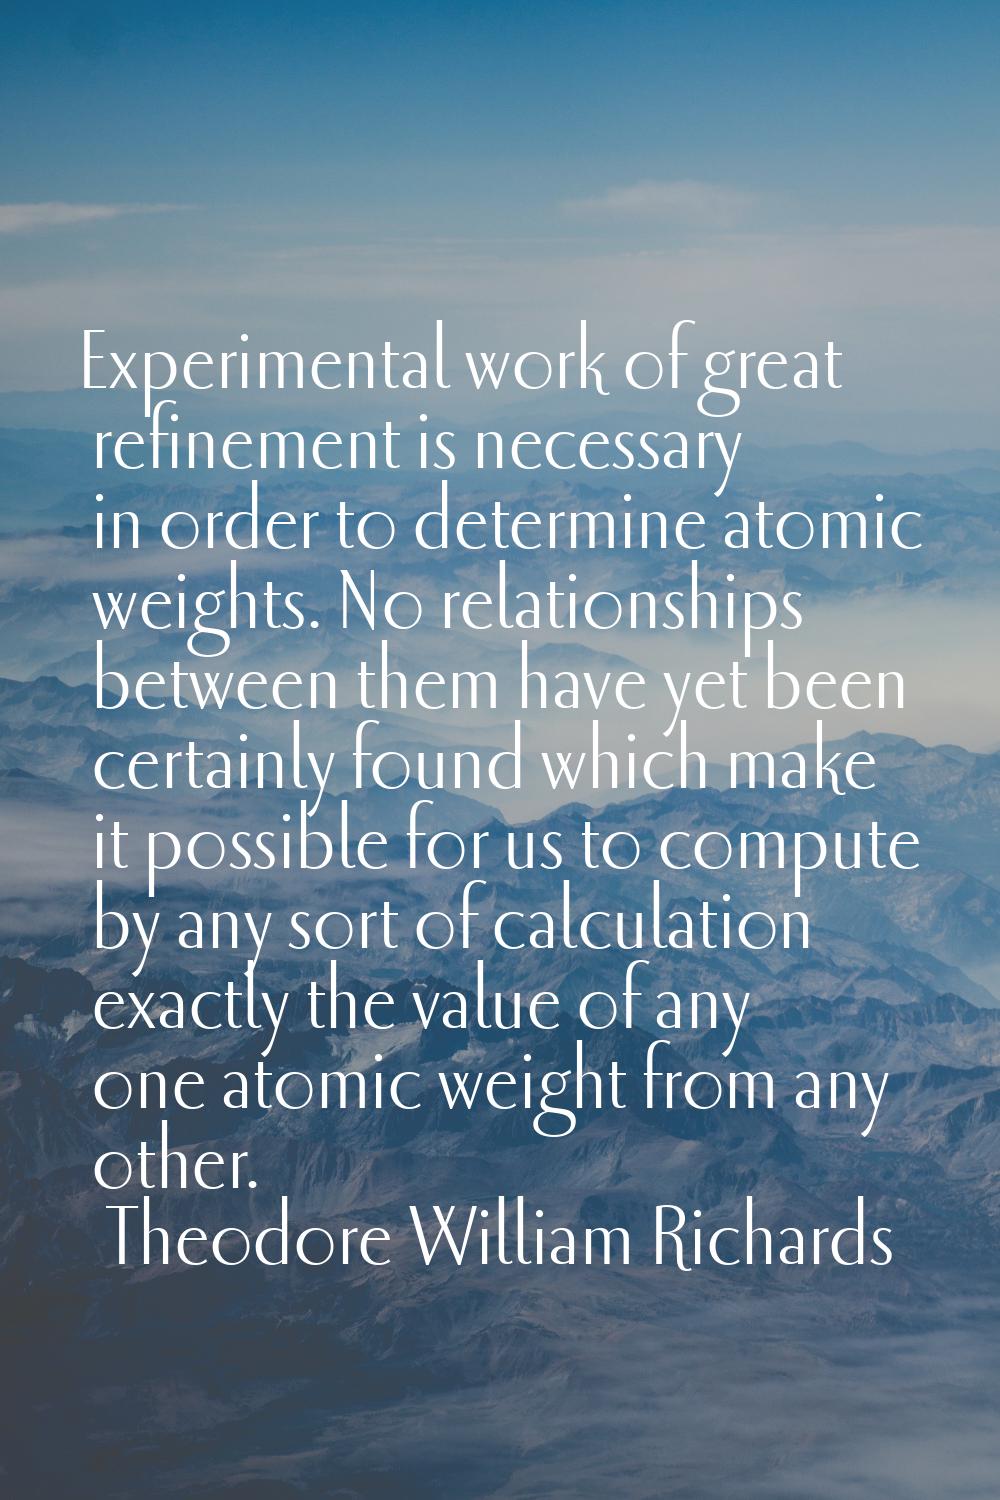 Experimental work of great refinement is necessary in order to determine atomic weights. No relatio